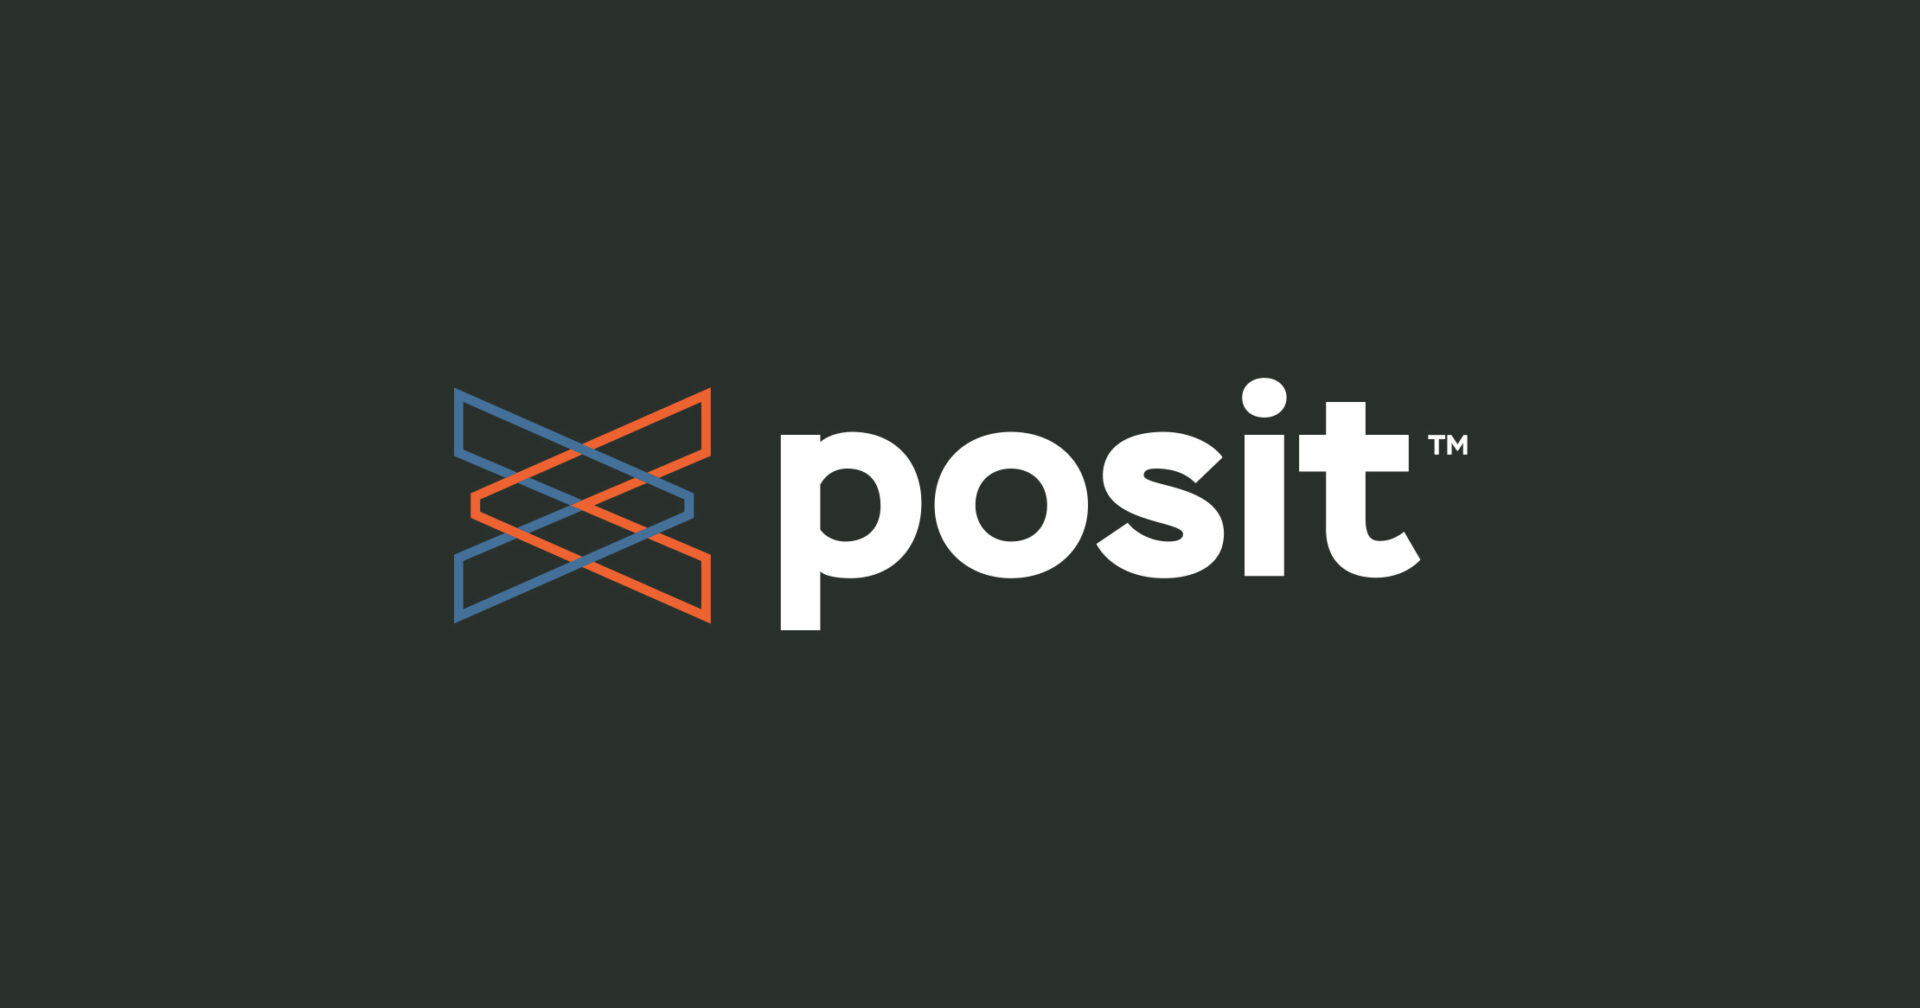 Posit logo that consists of two terminal carets facing opposite directions intersecting and the word posit next to the logo.